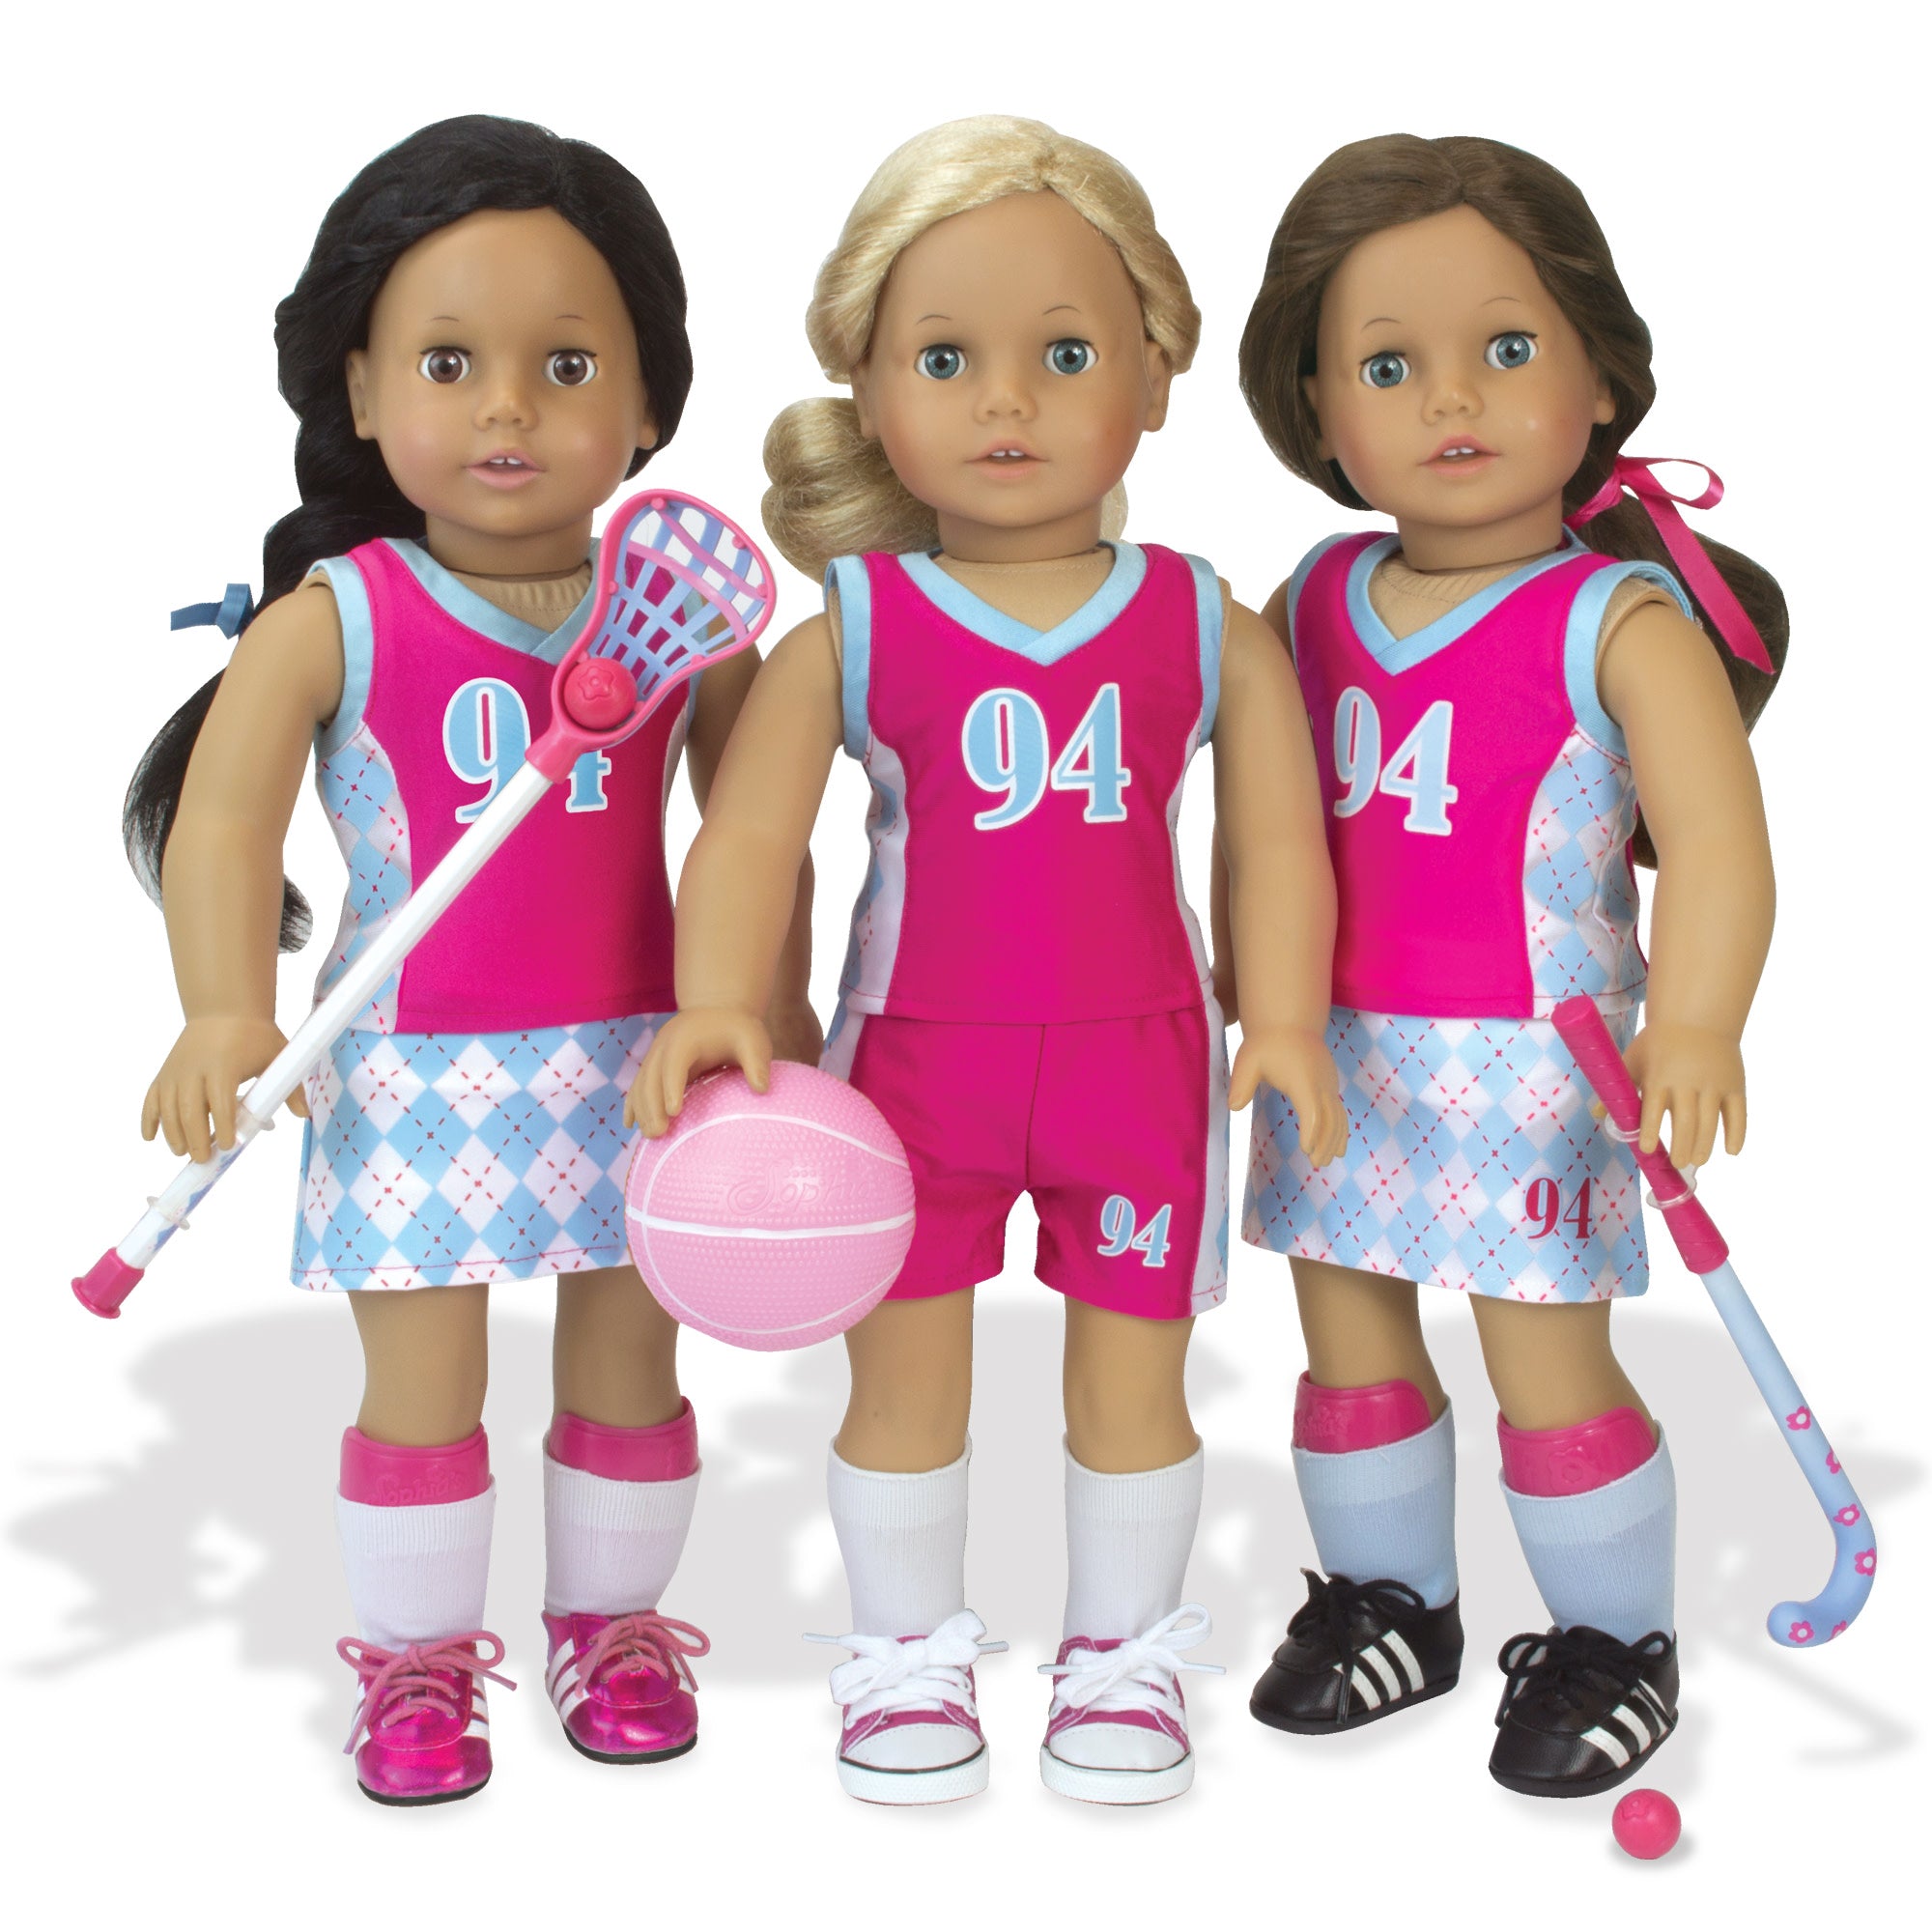 Sophia’s Complete Lacrosse, Field Hockey, Soccer, & Basketball Sports Equipment Playset for 18” Dolls, Pink/Green